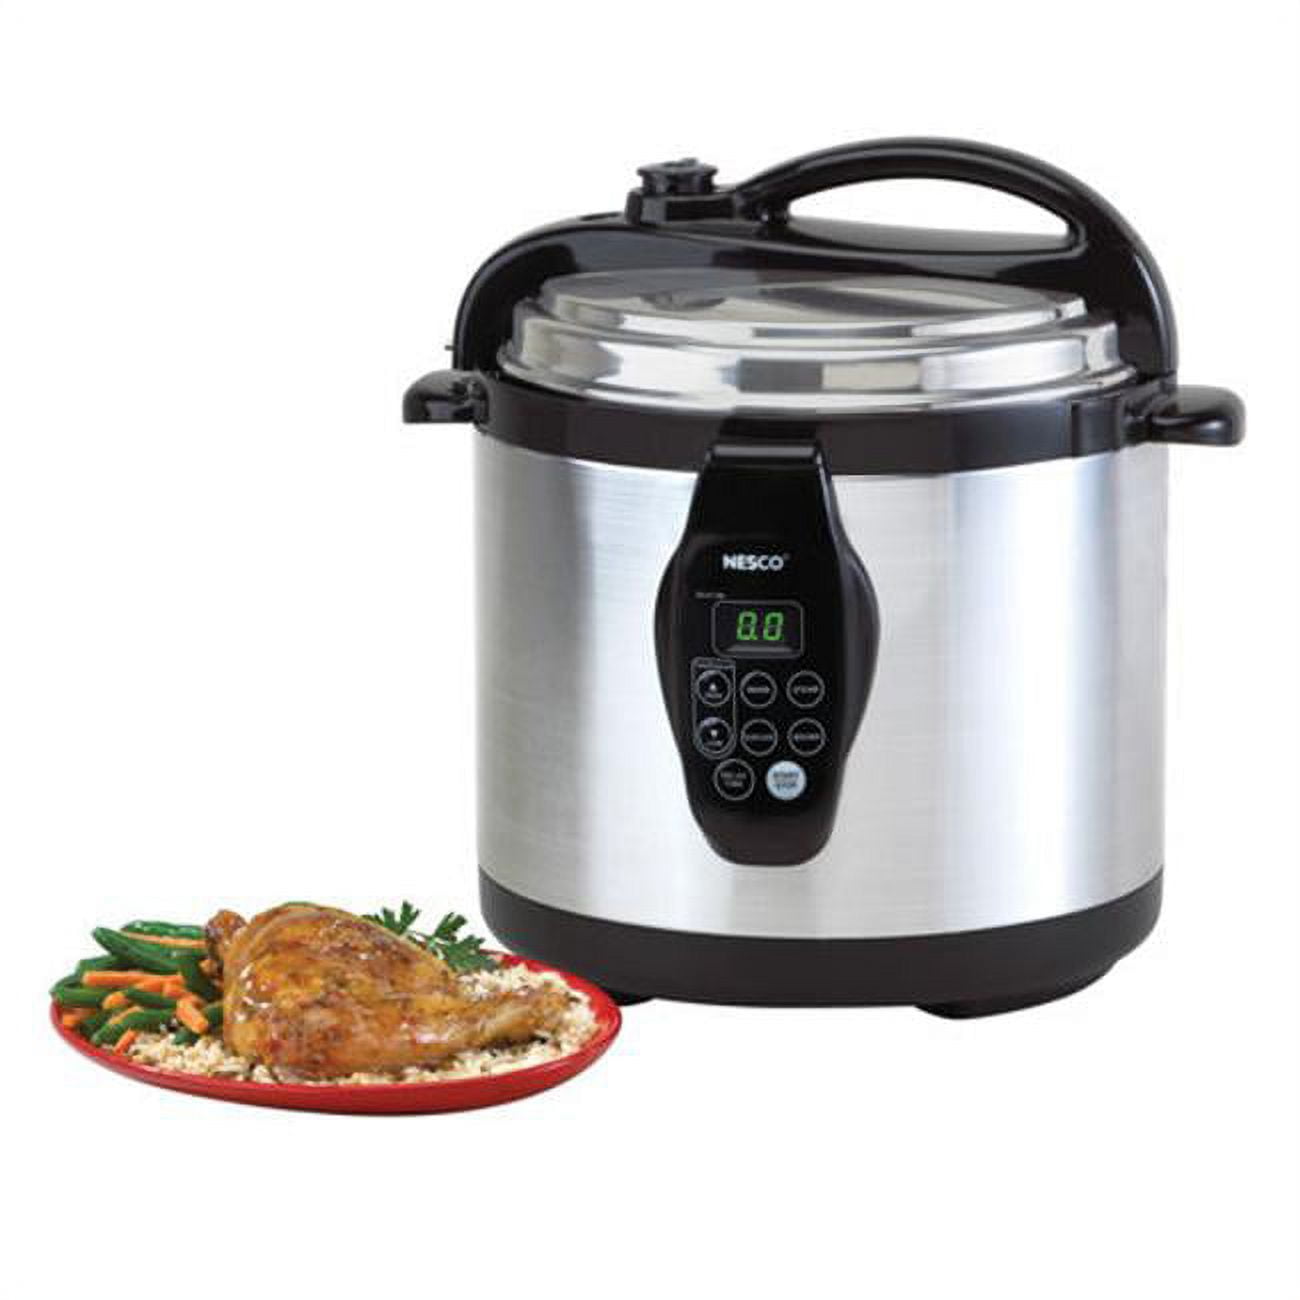 Nesco® Stainless Steel Analog Slow Cooker - Red, 6 qt - Pick 'n Save